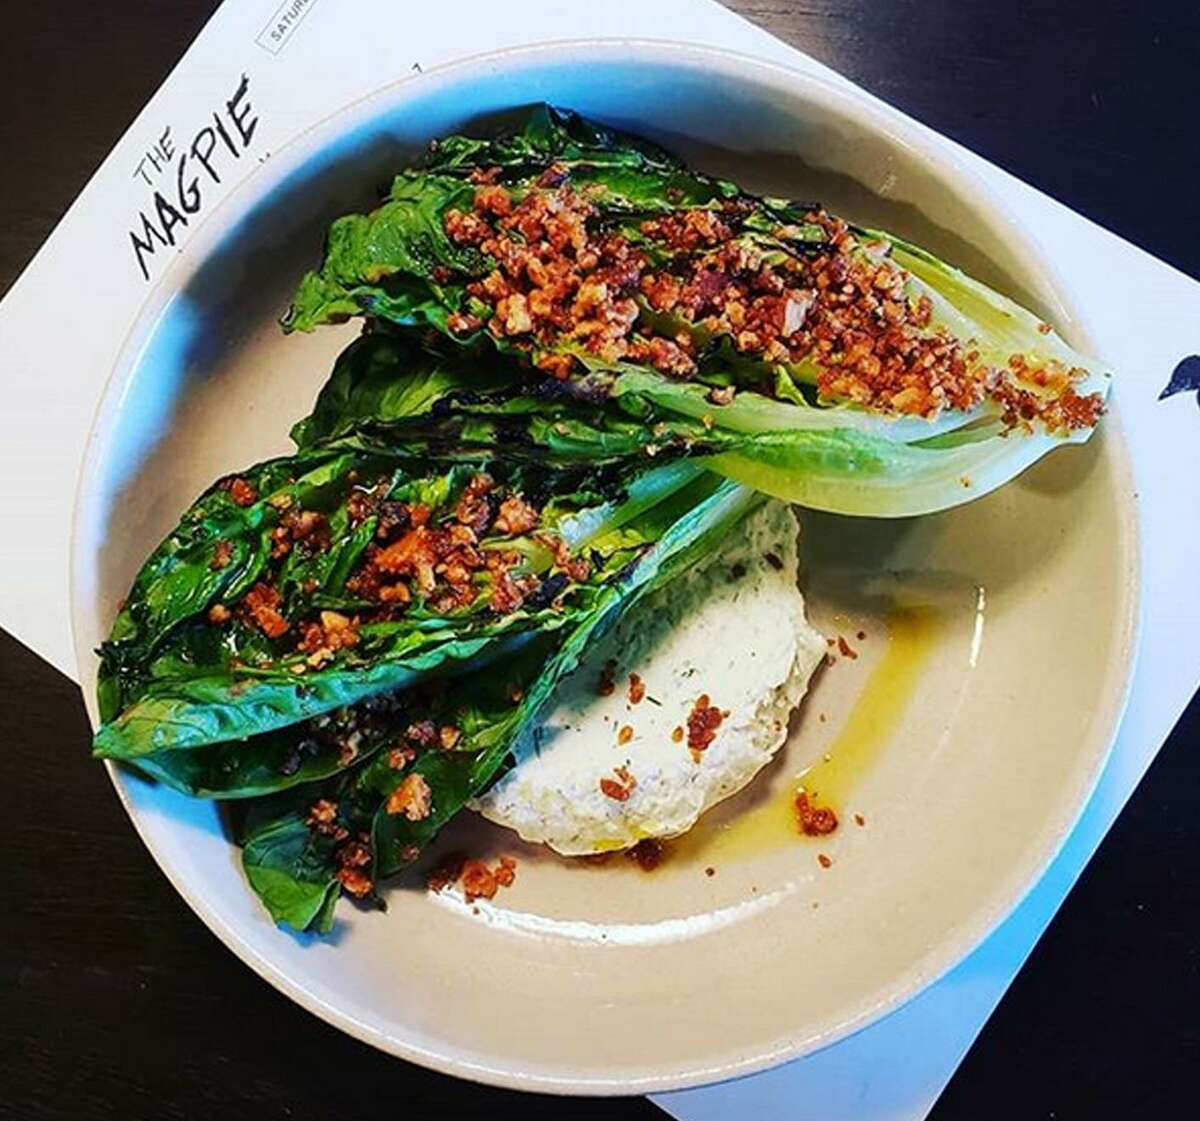 Grilled mini-Romaine salad from The Magpie